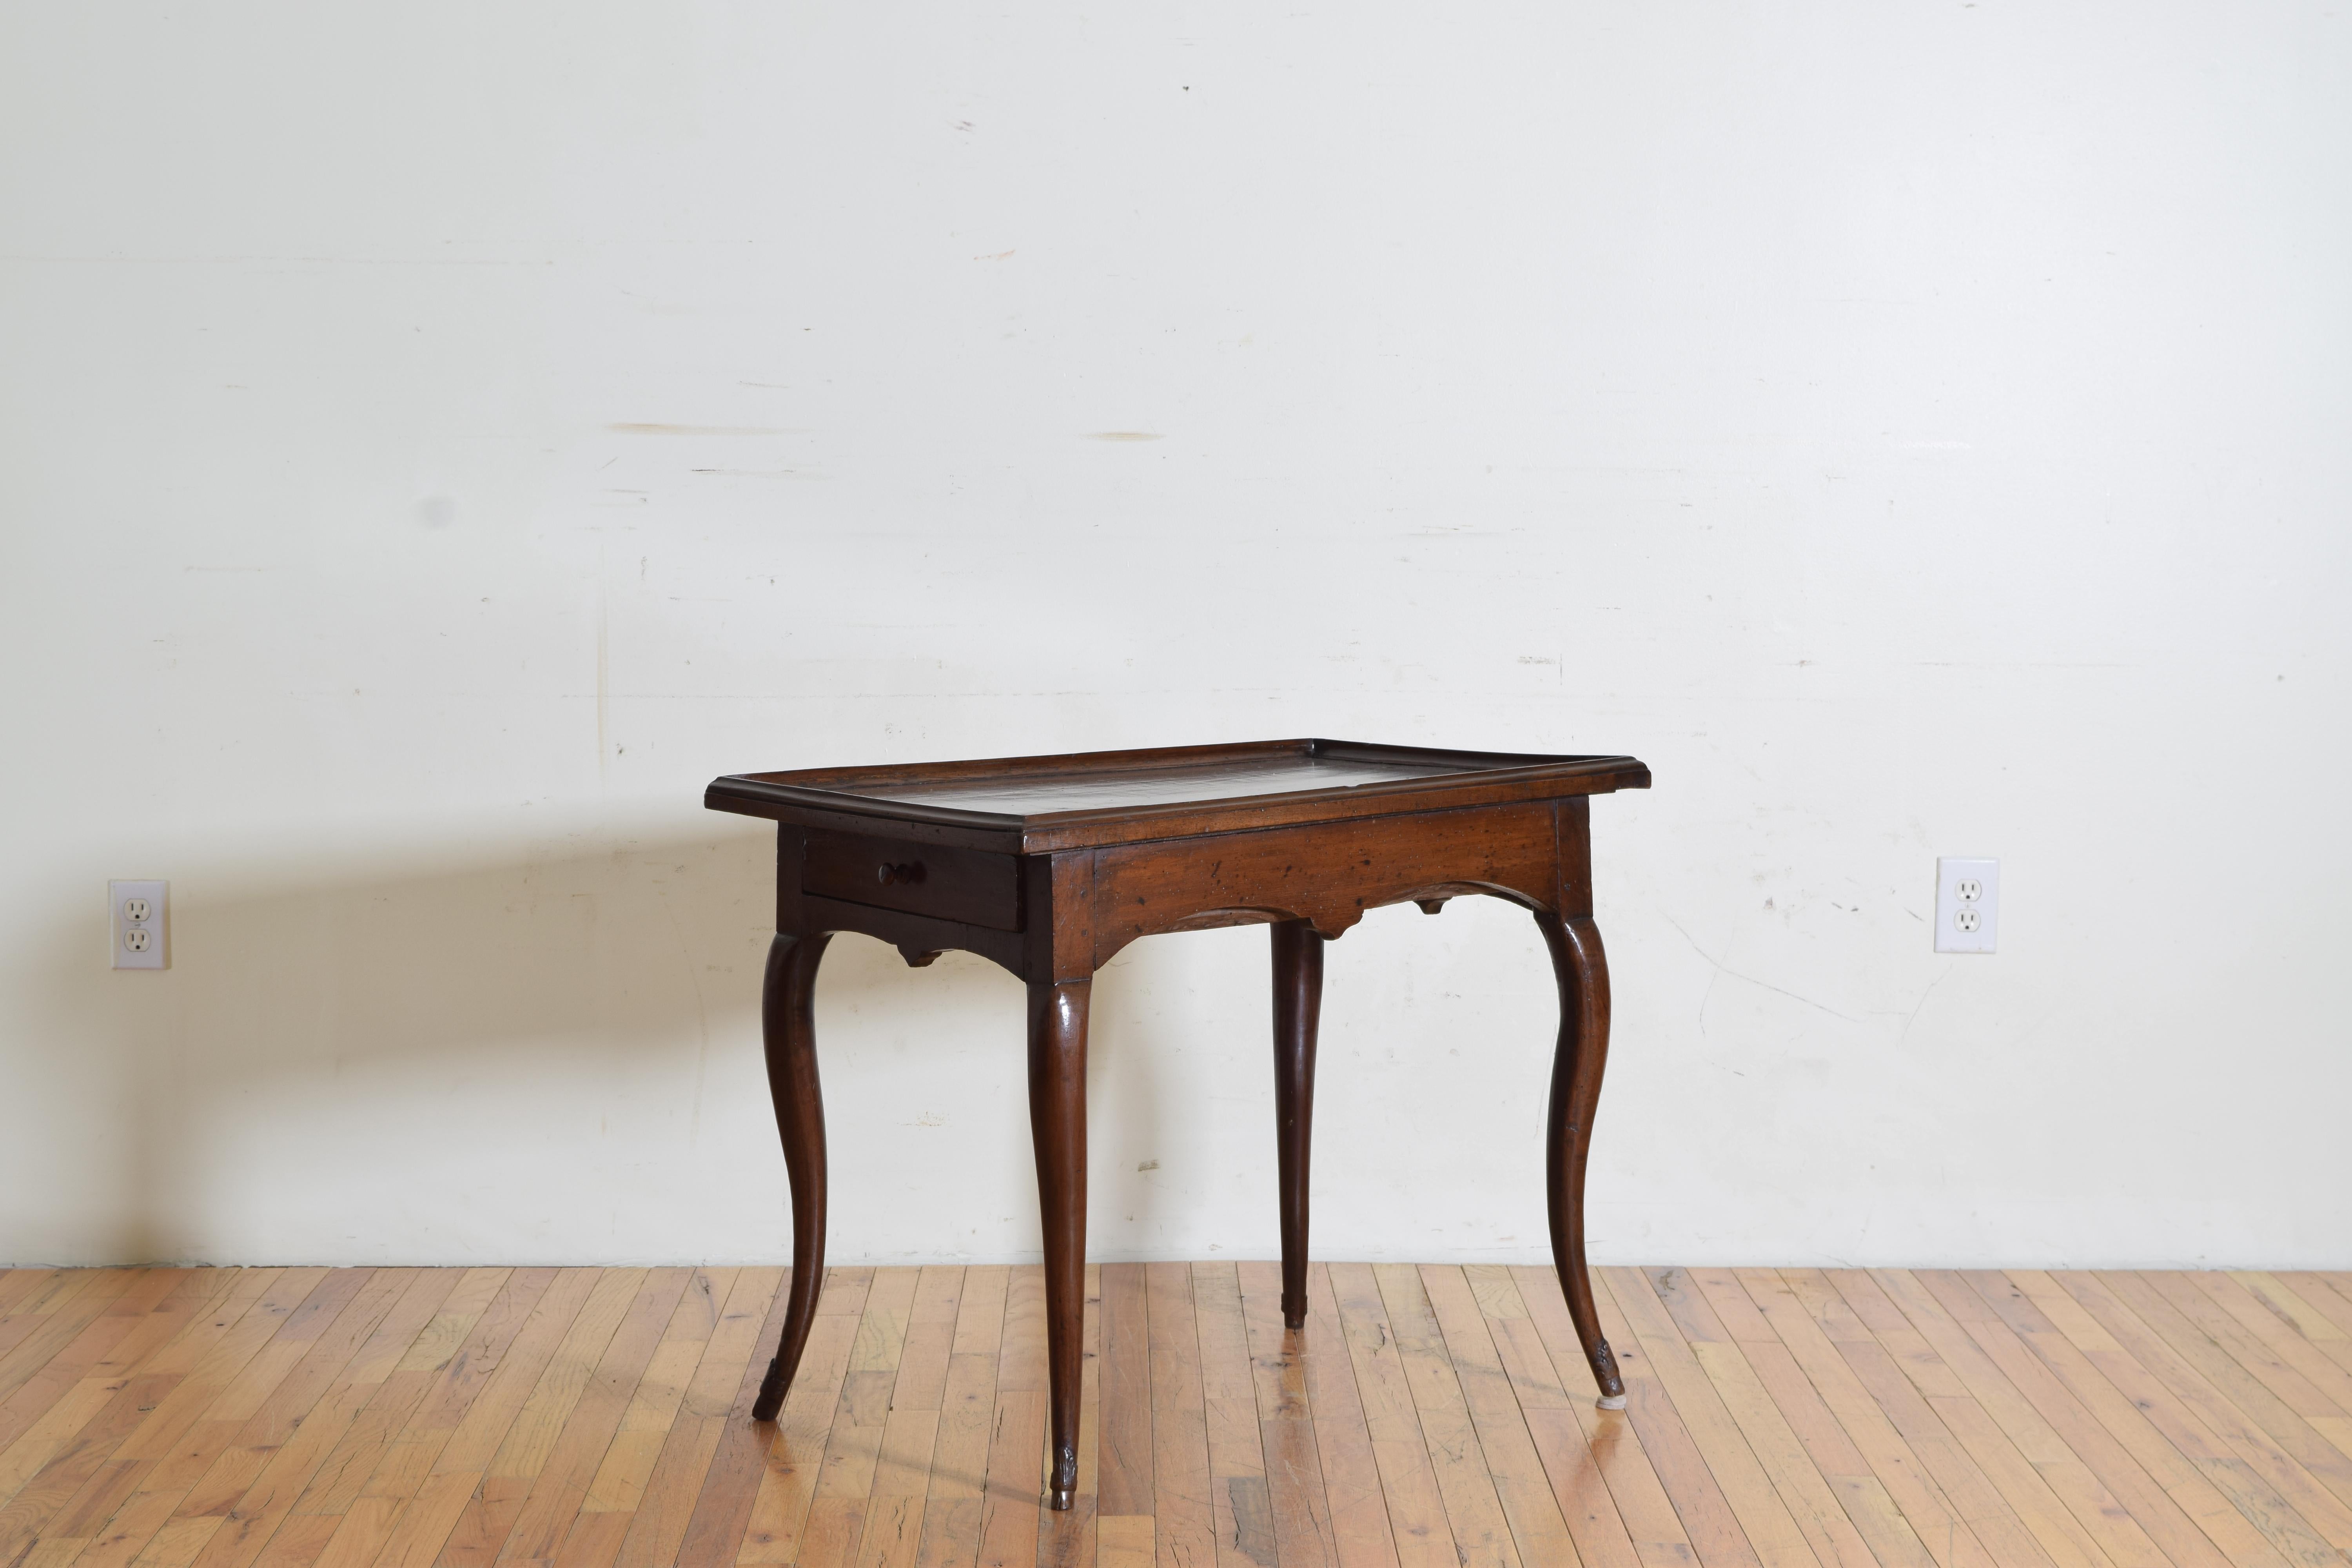 The rectangular top with a thick galleried edge above a conforming case housing two-side drawer each having a wooden pull, the table raised on tapering cabriole legs ending in small hoof feet with carved “feathers” above them.